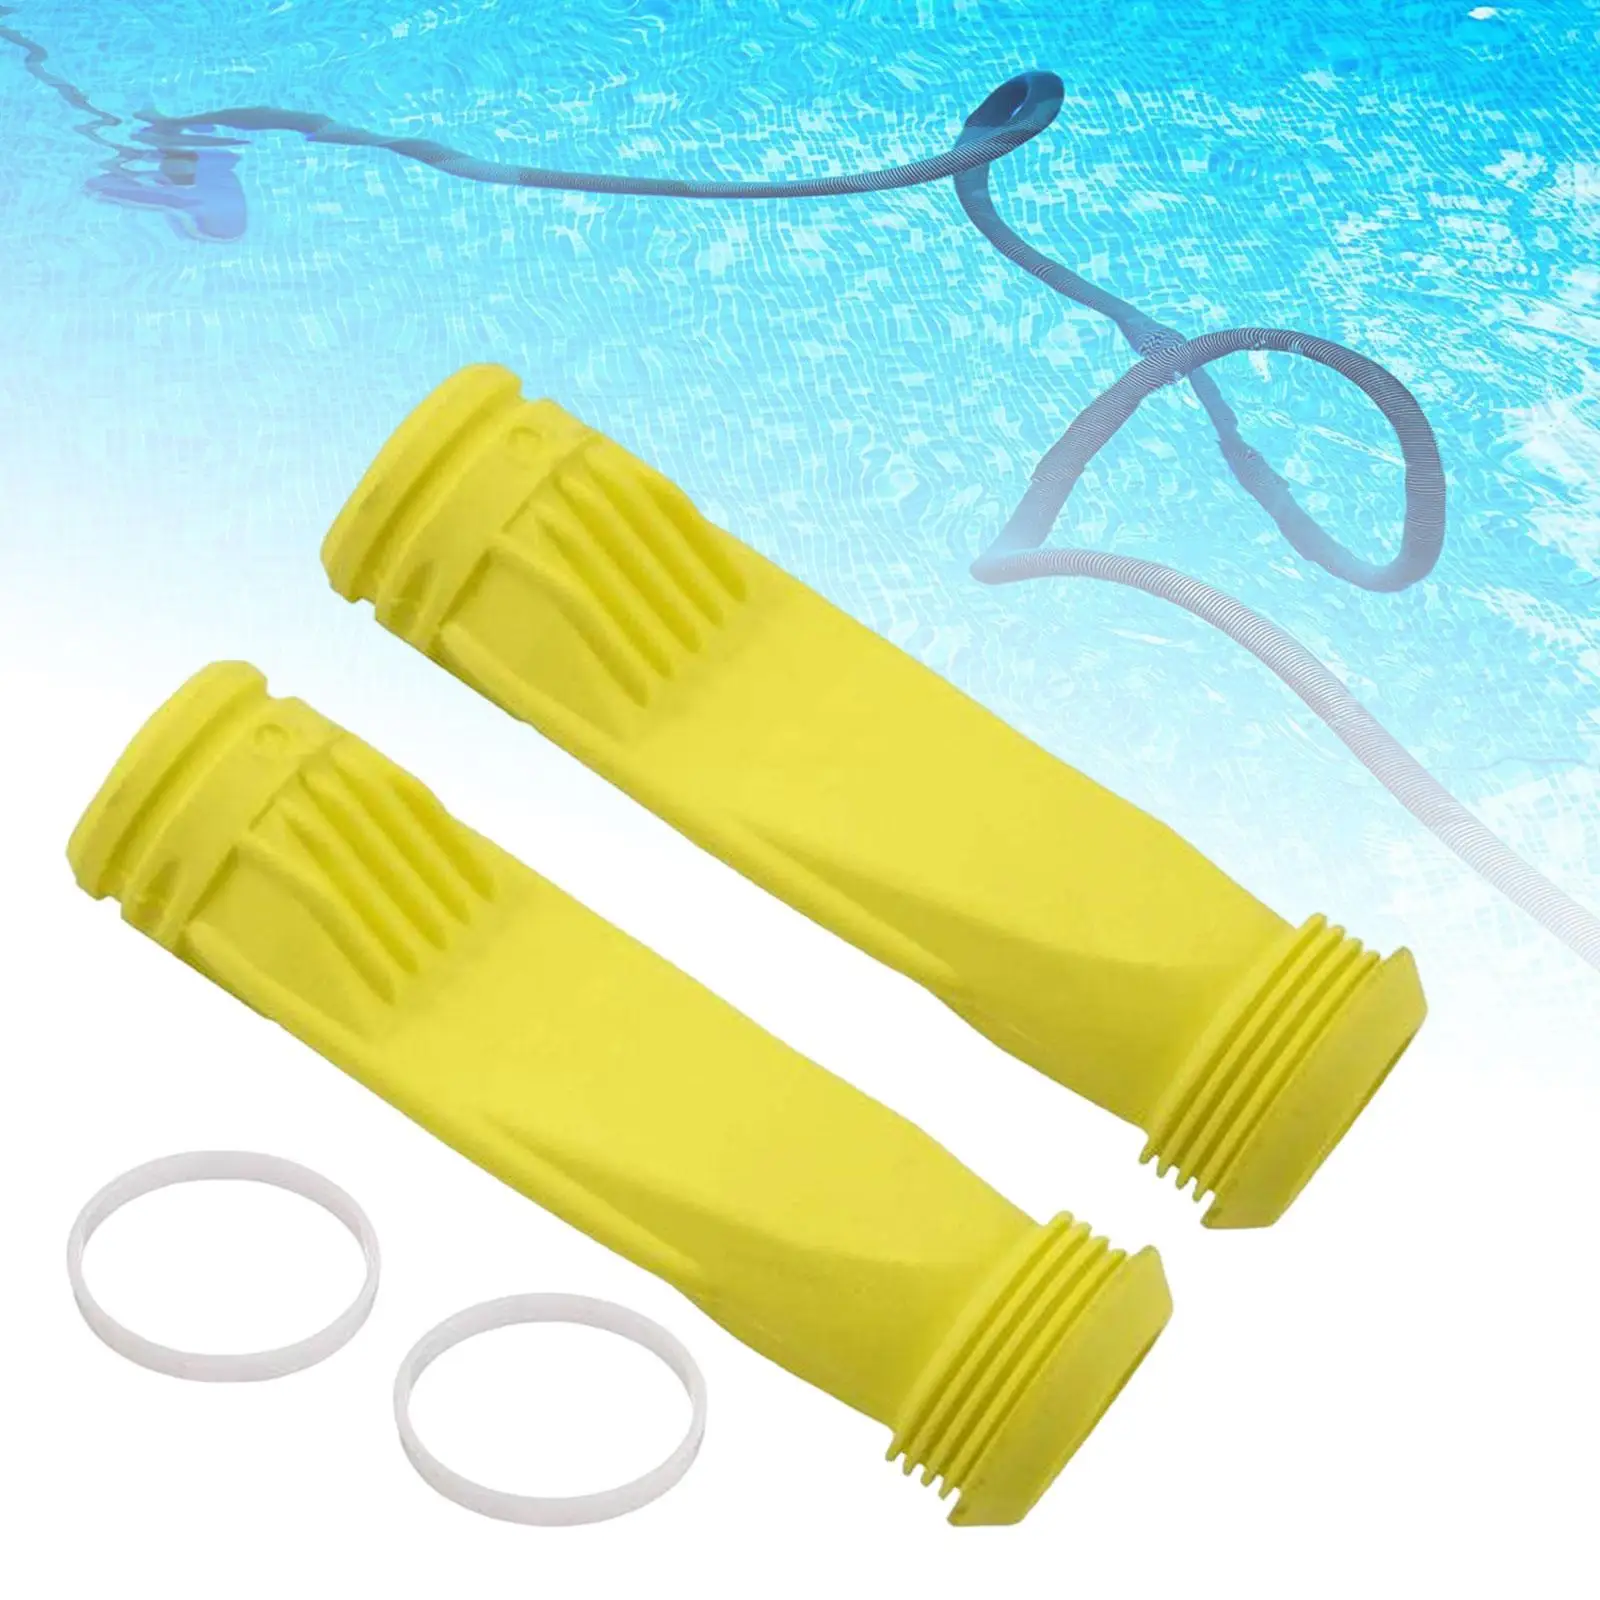 2 Pieces Pool Cleaner Diaphragm Good Performance Universal Durable Long Service Life Easily Install Premium Replaces Heavy Duty